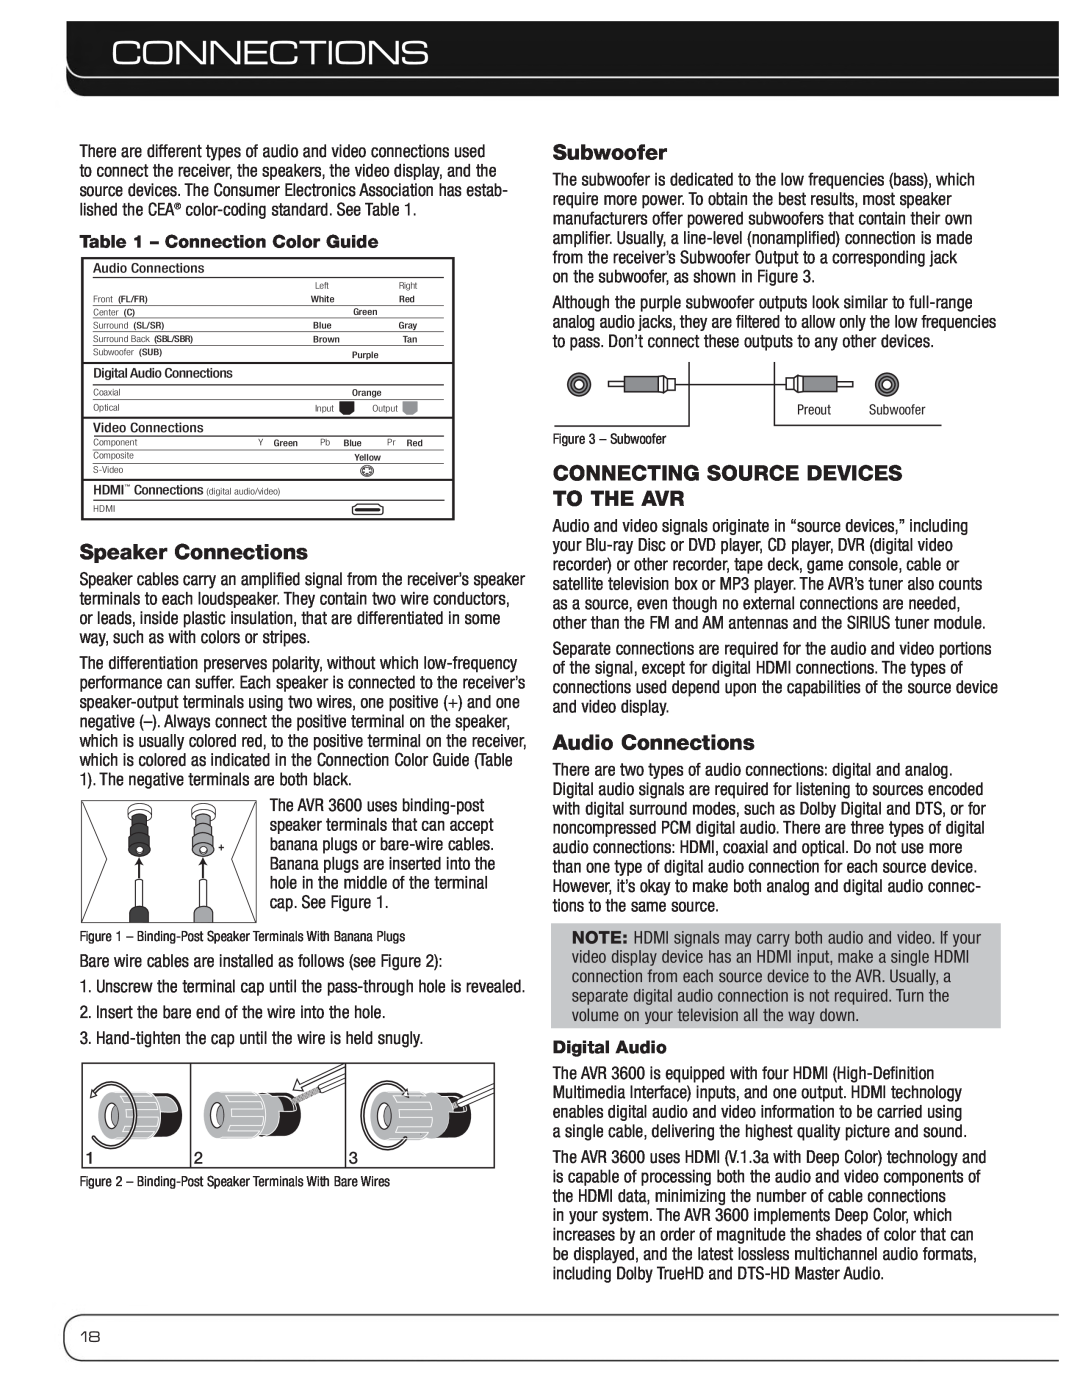 Harman-Kardon AVR 3600 owner manual Speaker Connections, Subwoofer, Connecting Source Devices To The Avr, Audio Connections 